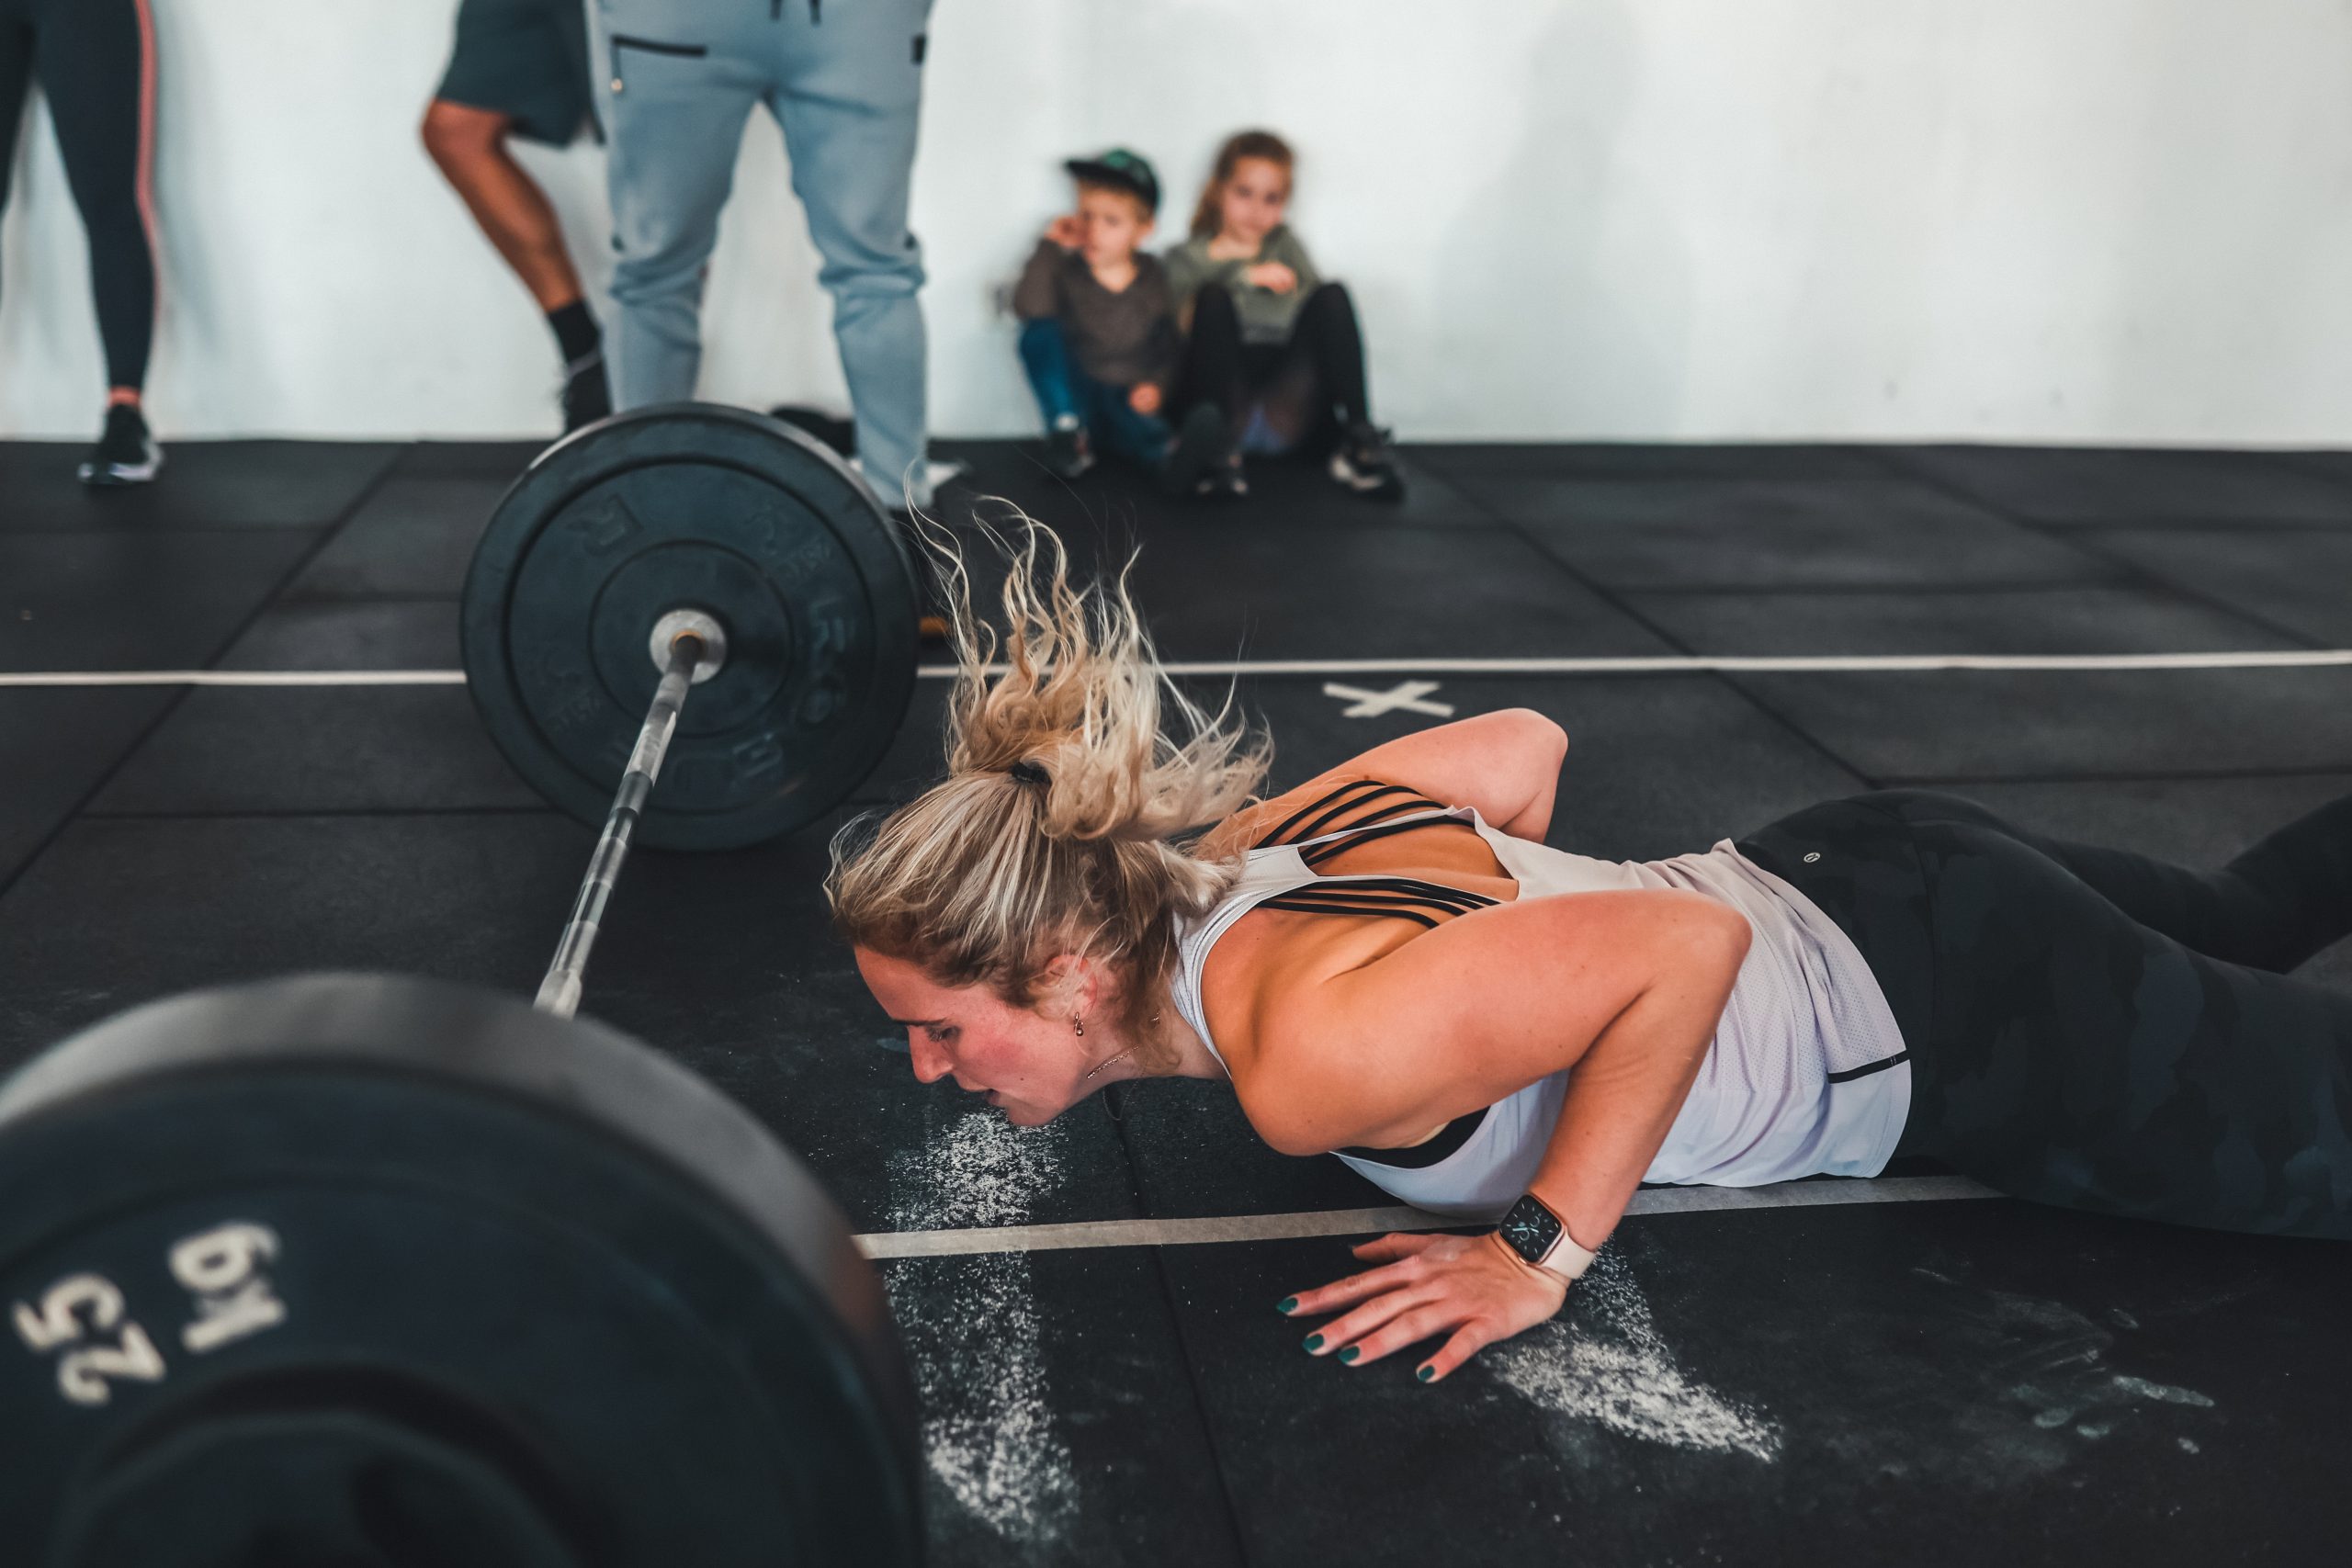 CrossFit Athlete performing Open 22.2, burpees over-the-bar